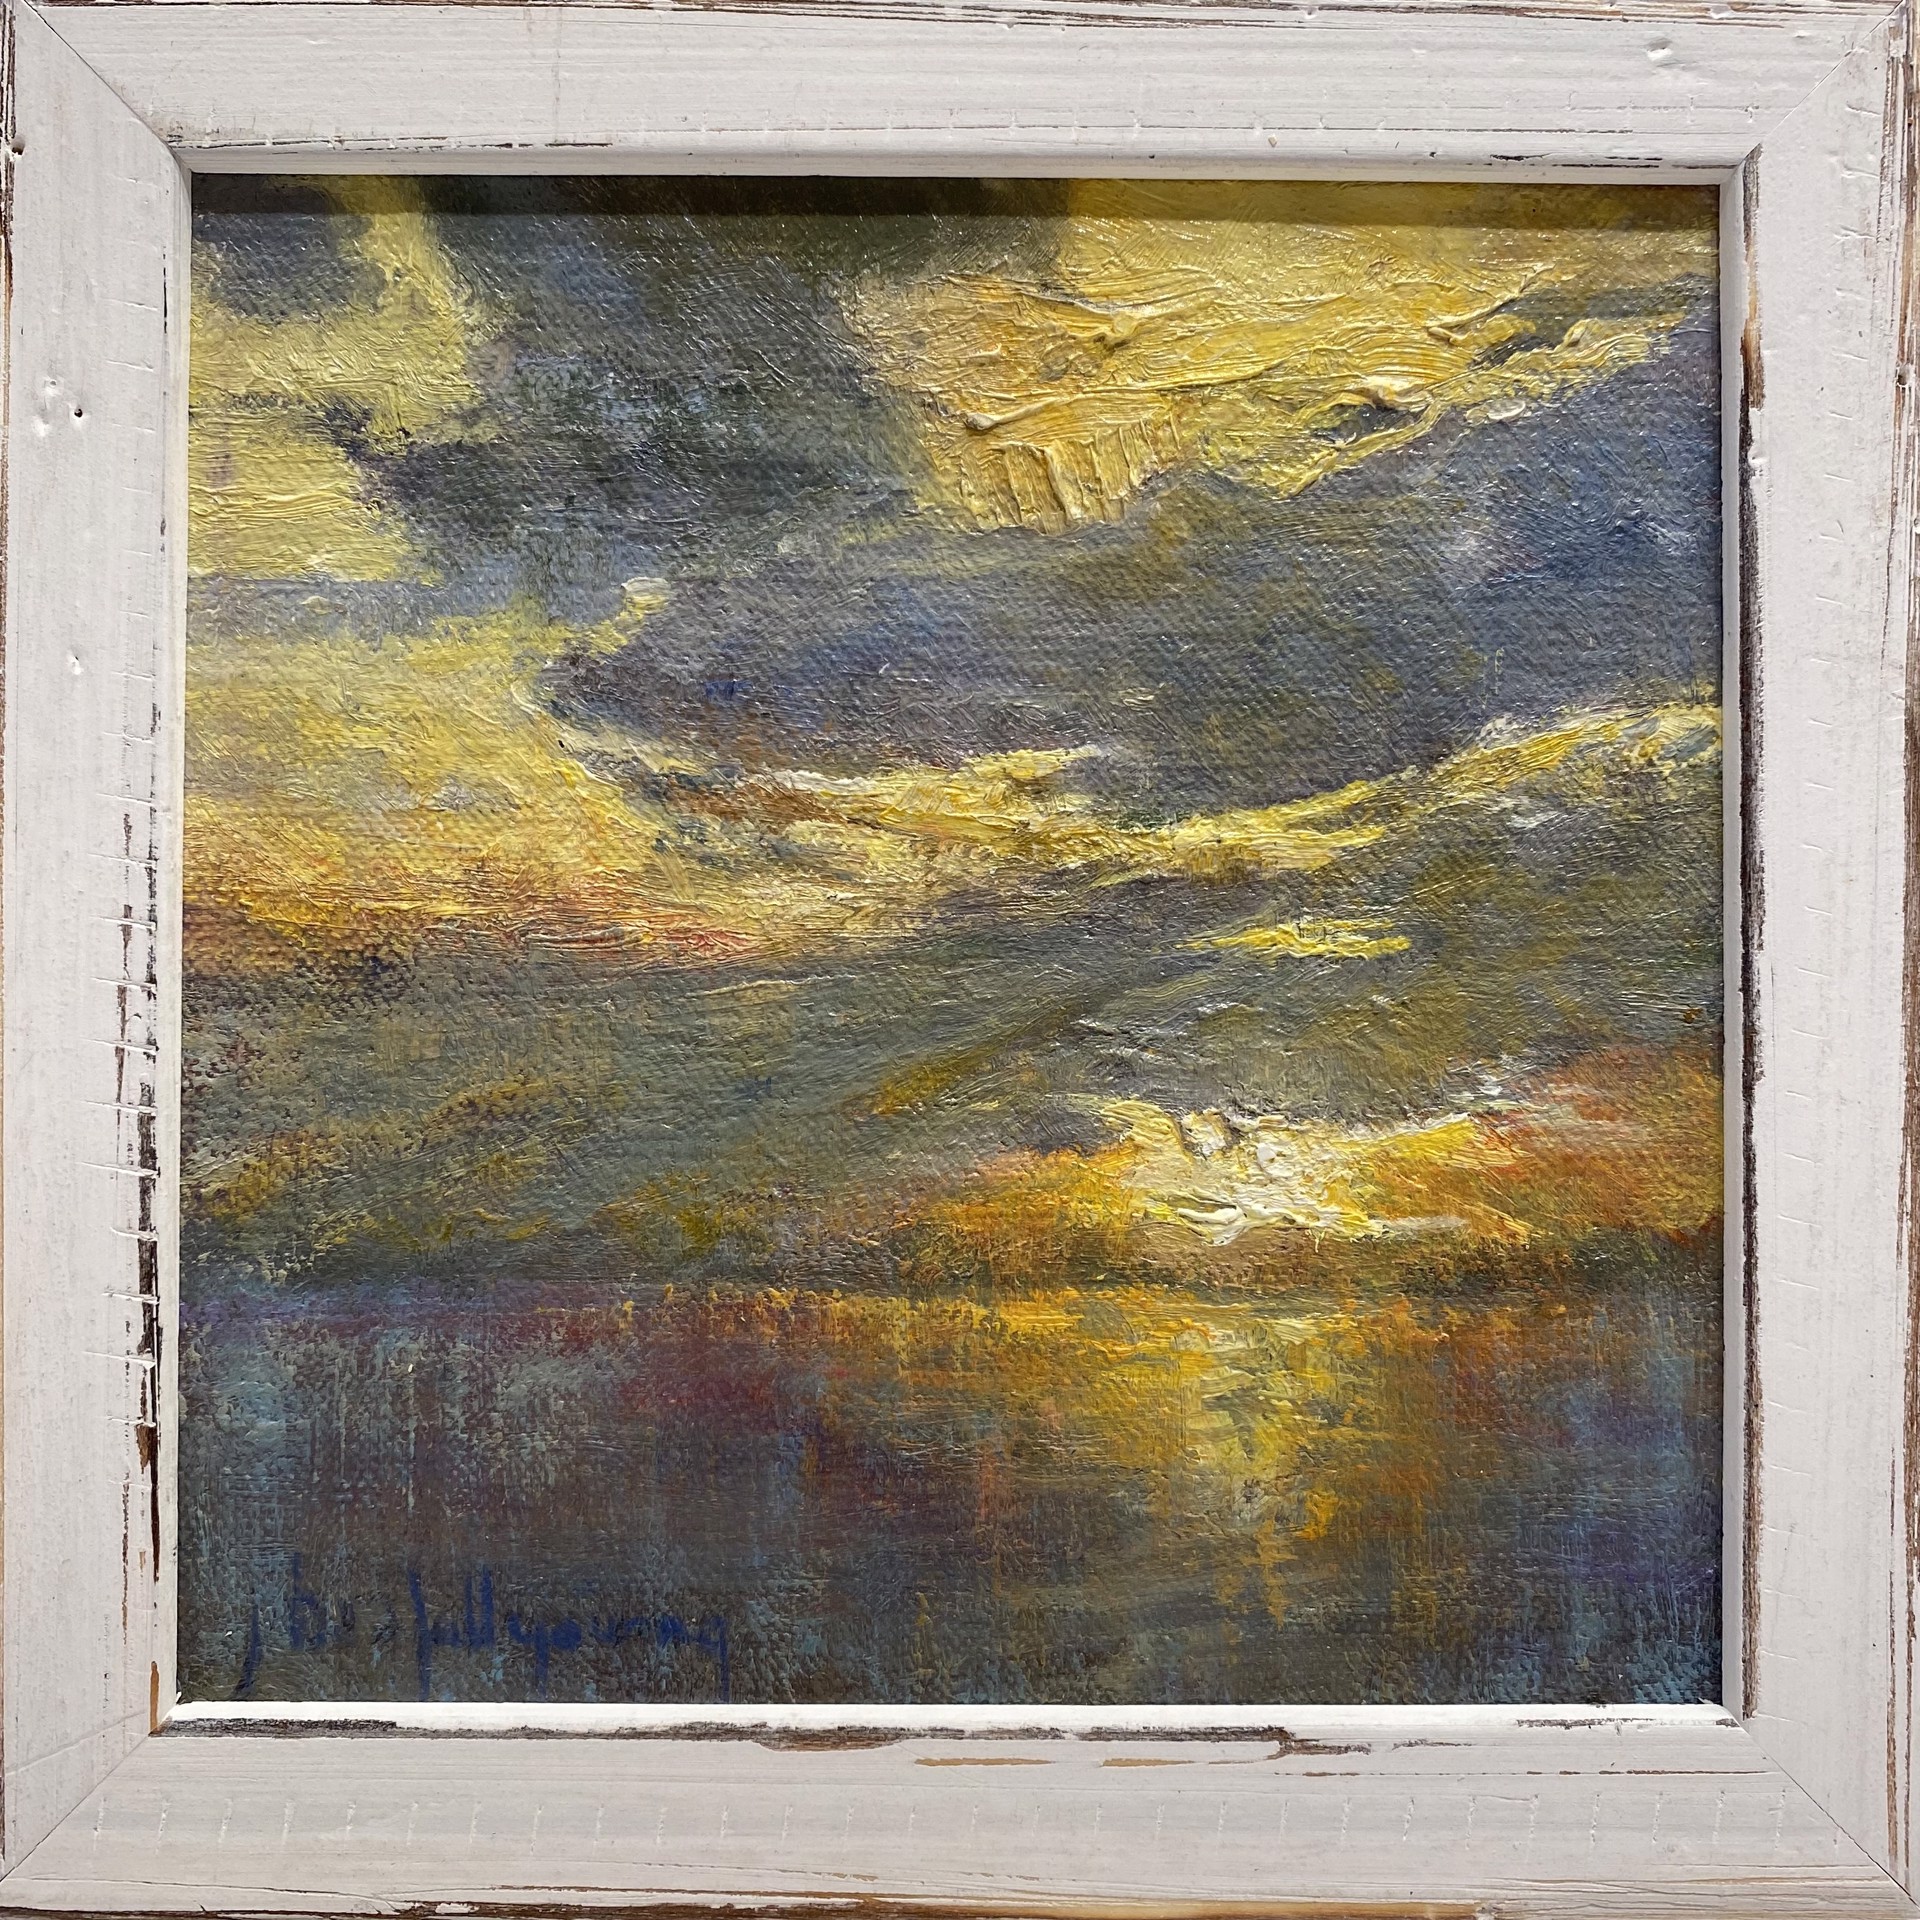 Blue Sky and Orange Sunset (L602) by Joan Horsfall Young